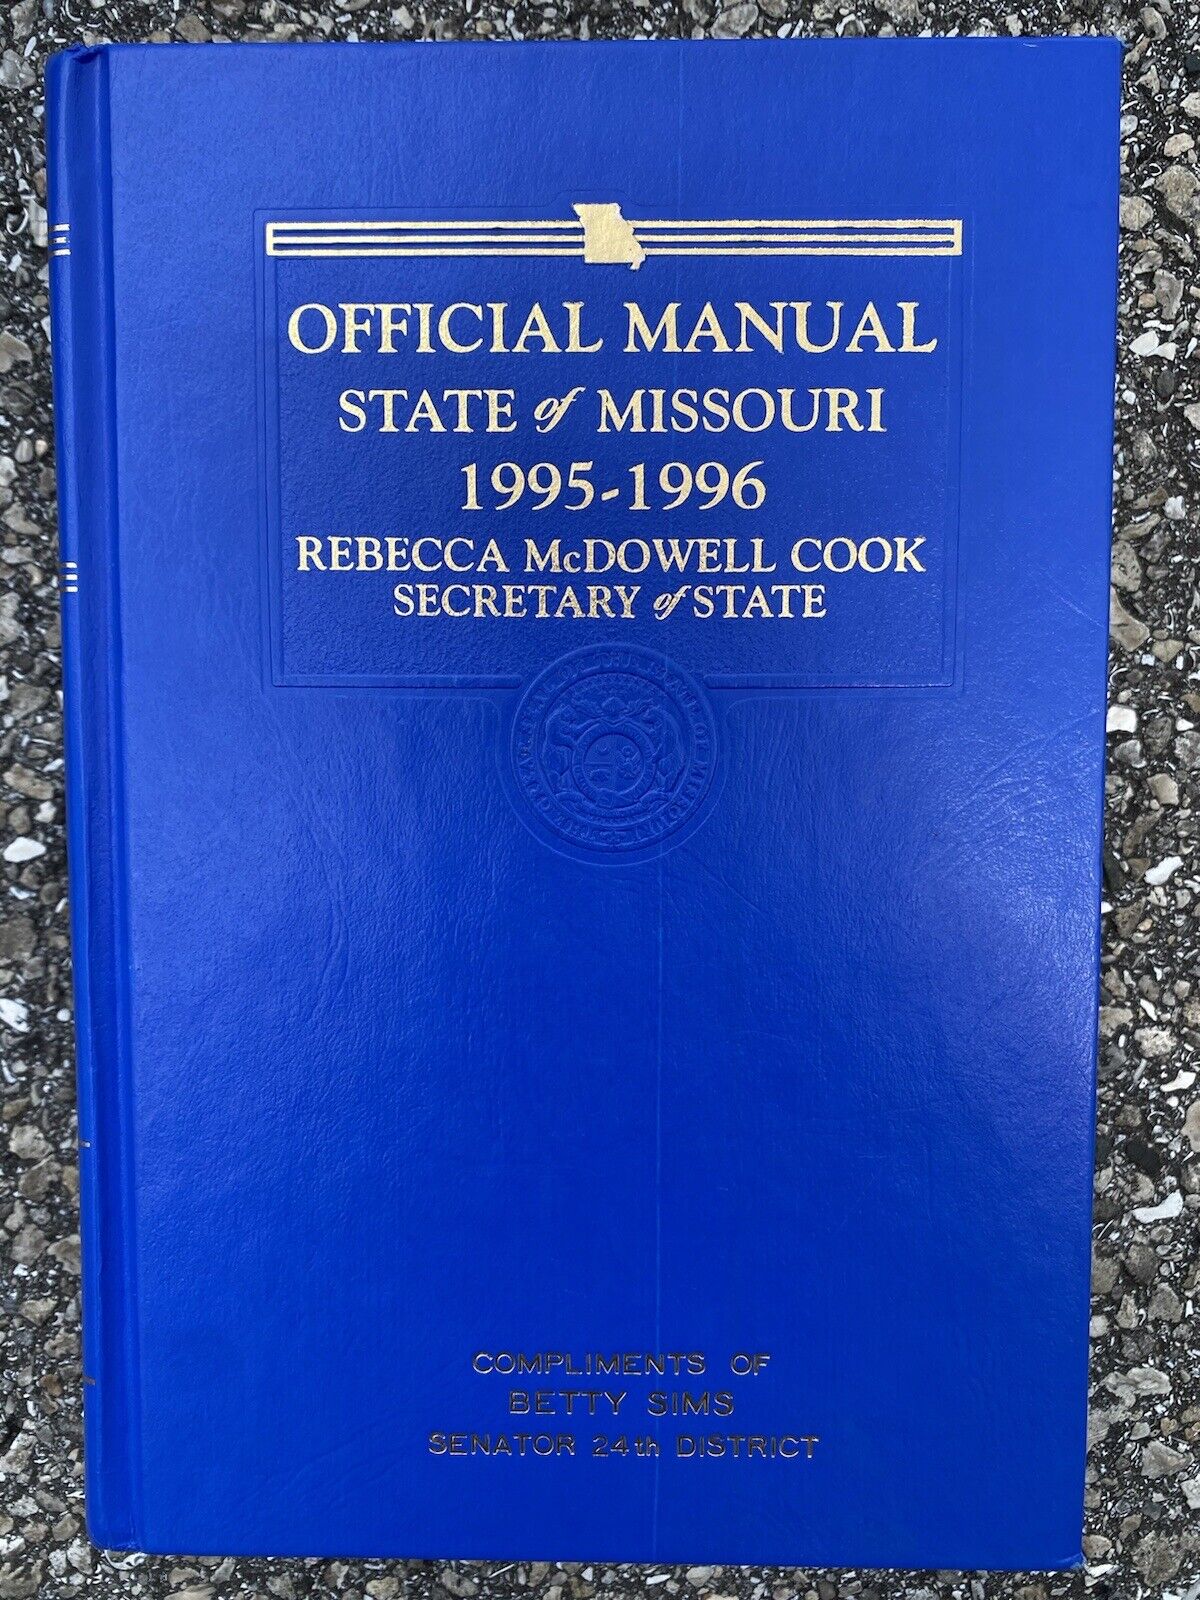 Rebecca McDowell Cook 1995 - 1996 Official Manual State of Missouri Blue Book